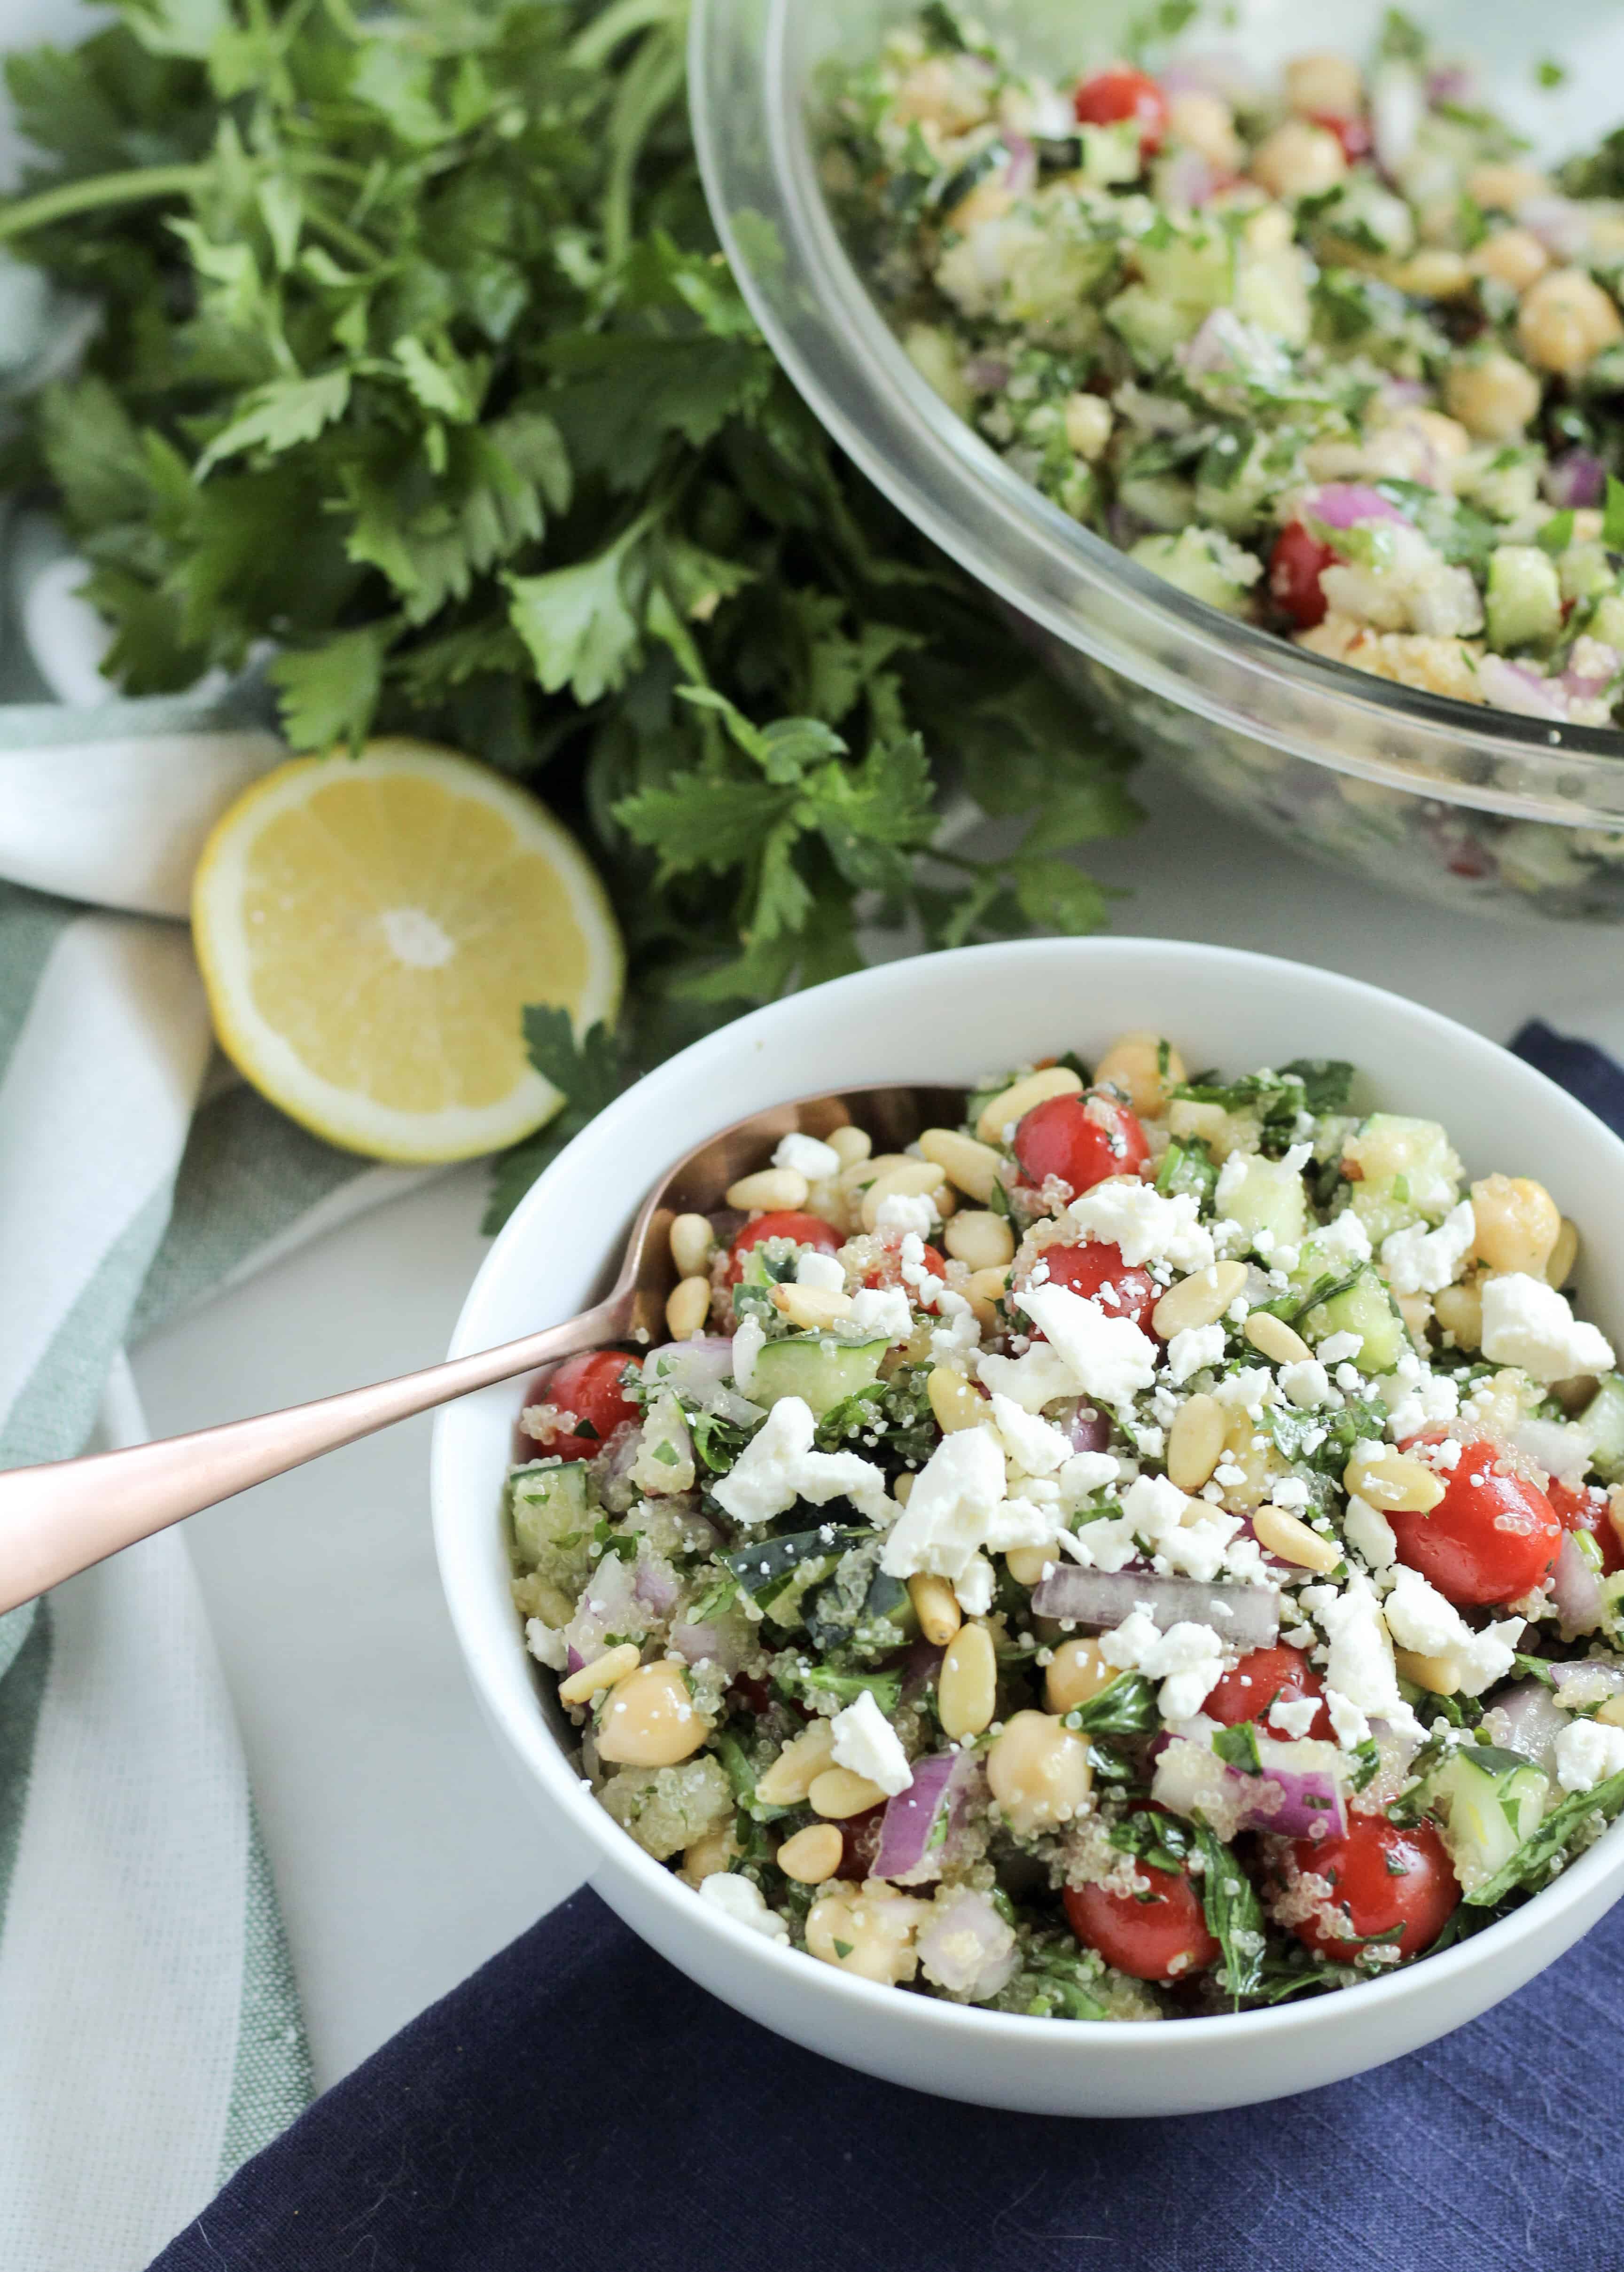 Celebrate the fresh flavor with this spin on traditional tabbouleh salad. This amaranth tabbouleh with chickpeas is one of the easiest amaranth recipes!